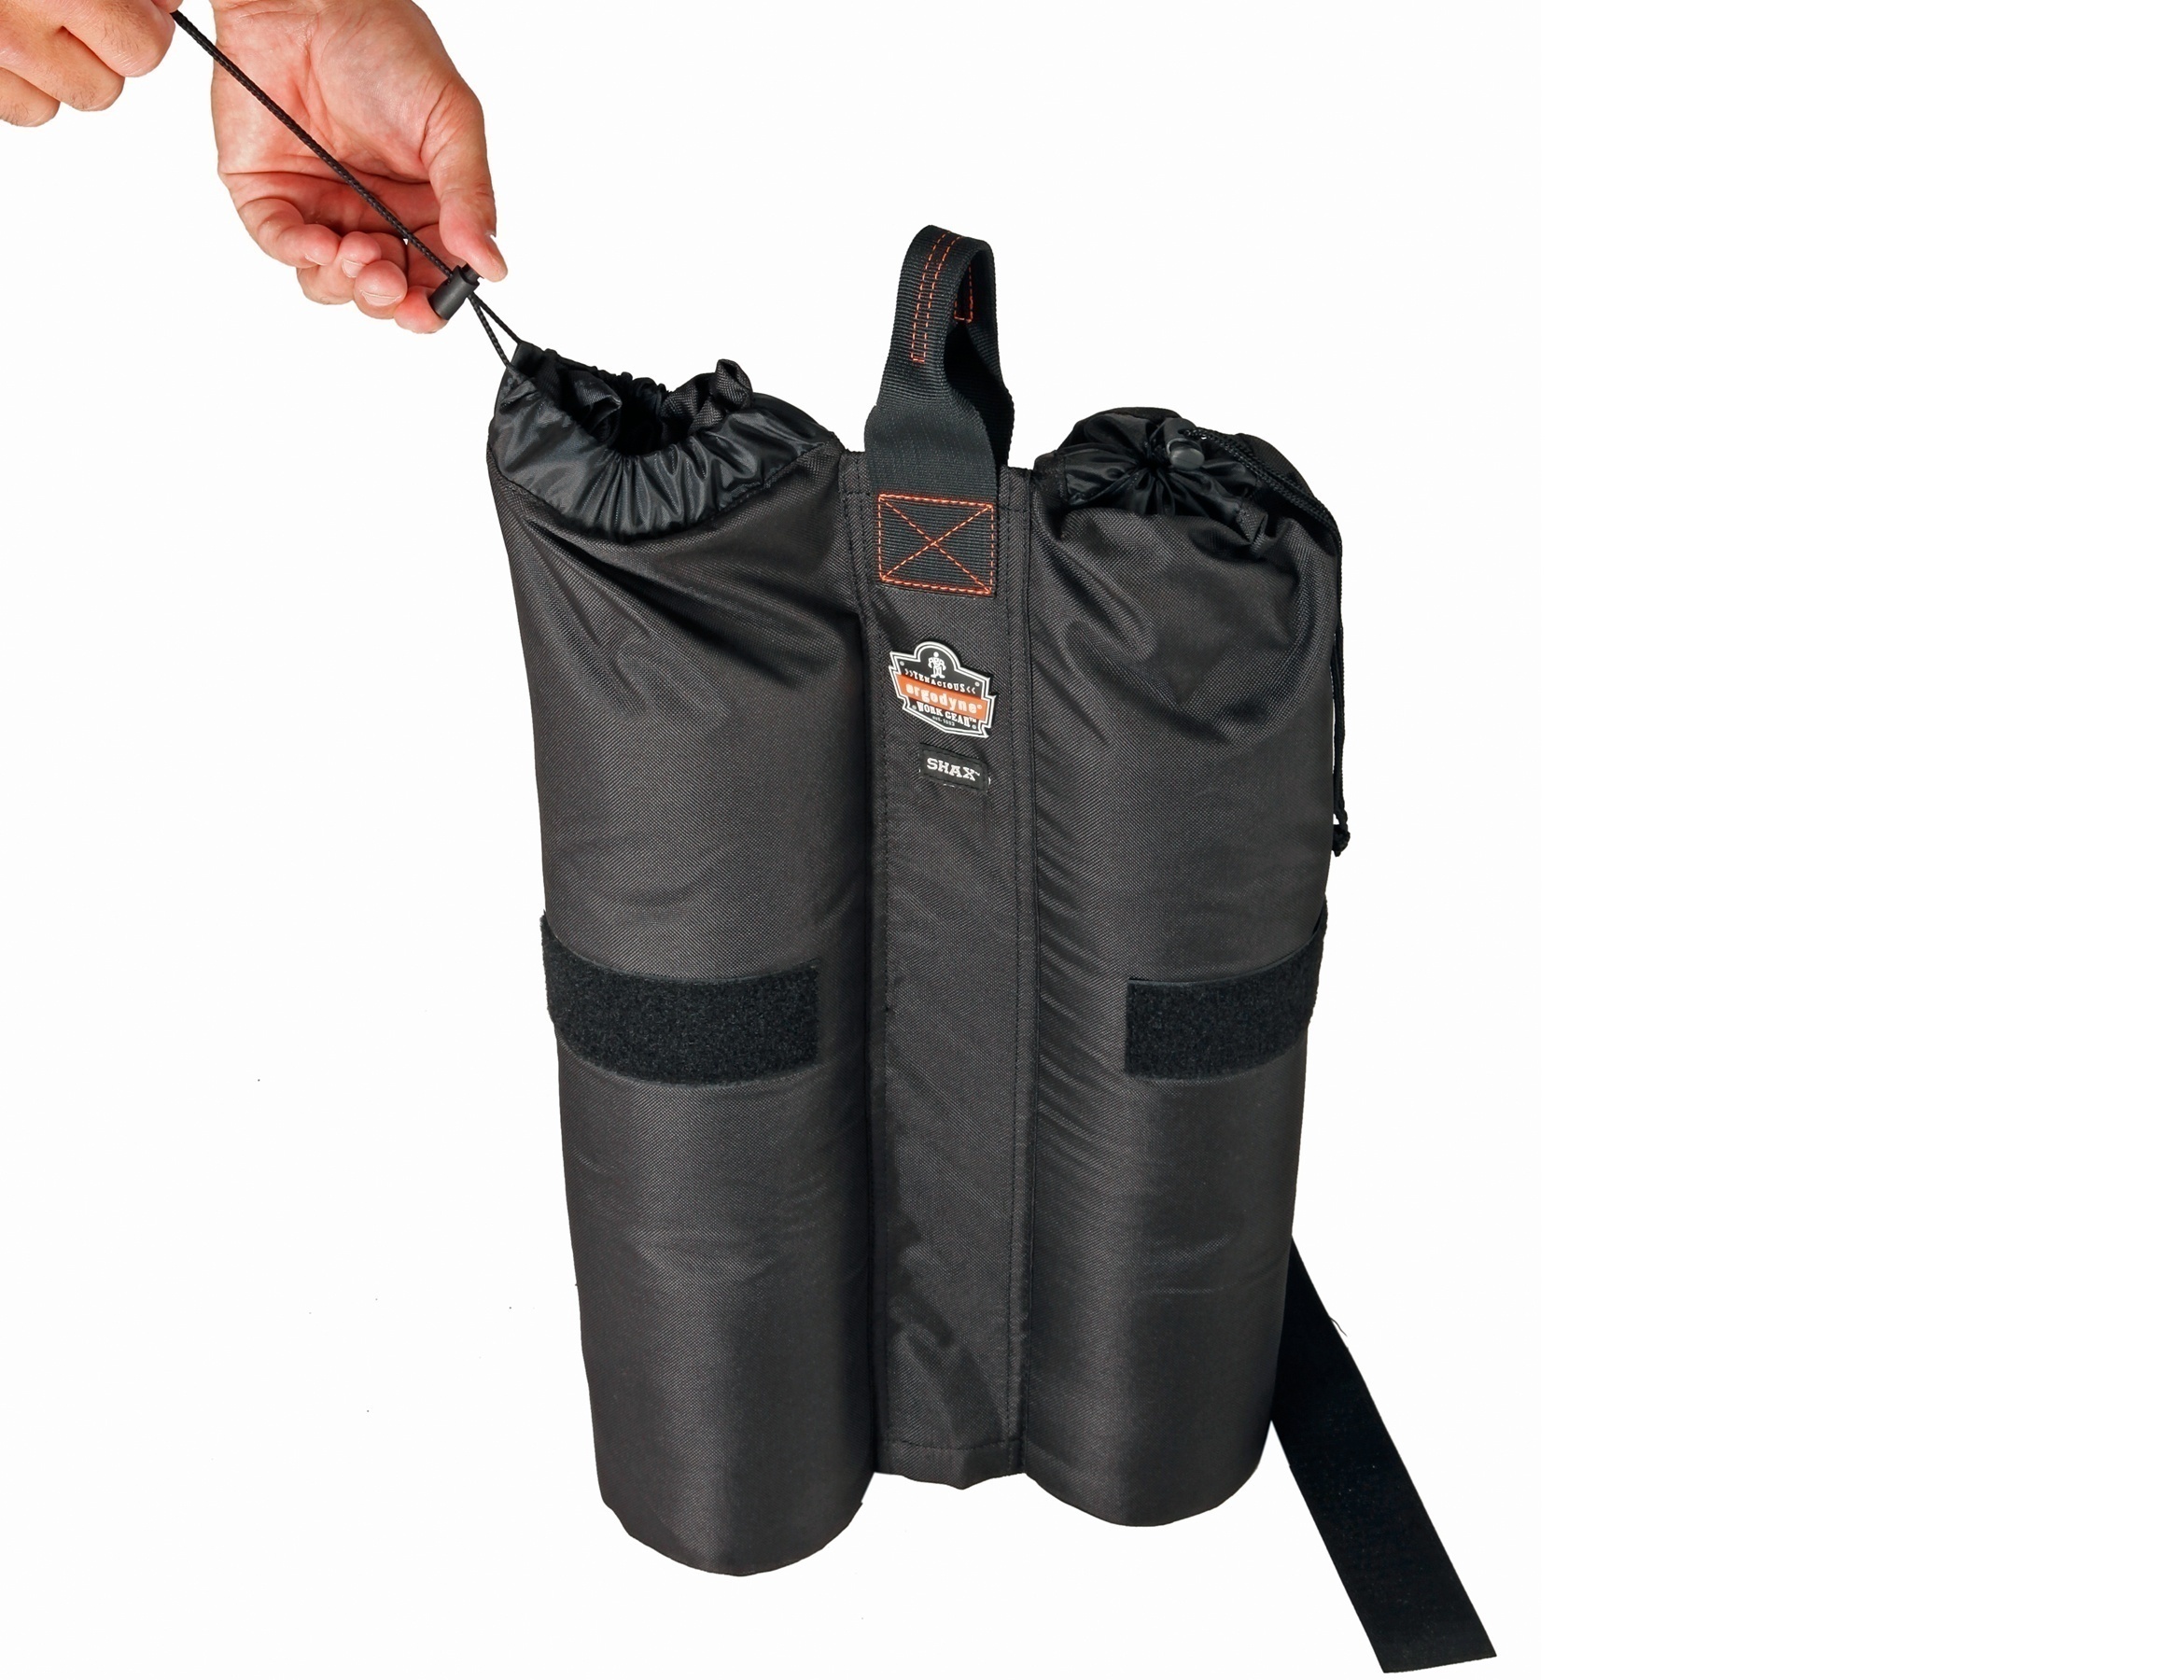 Ergodyne 6094 Shax Tent Weight Bags - Set of 2 from GME Supply